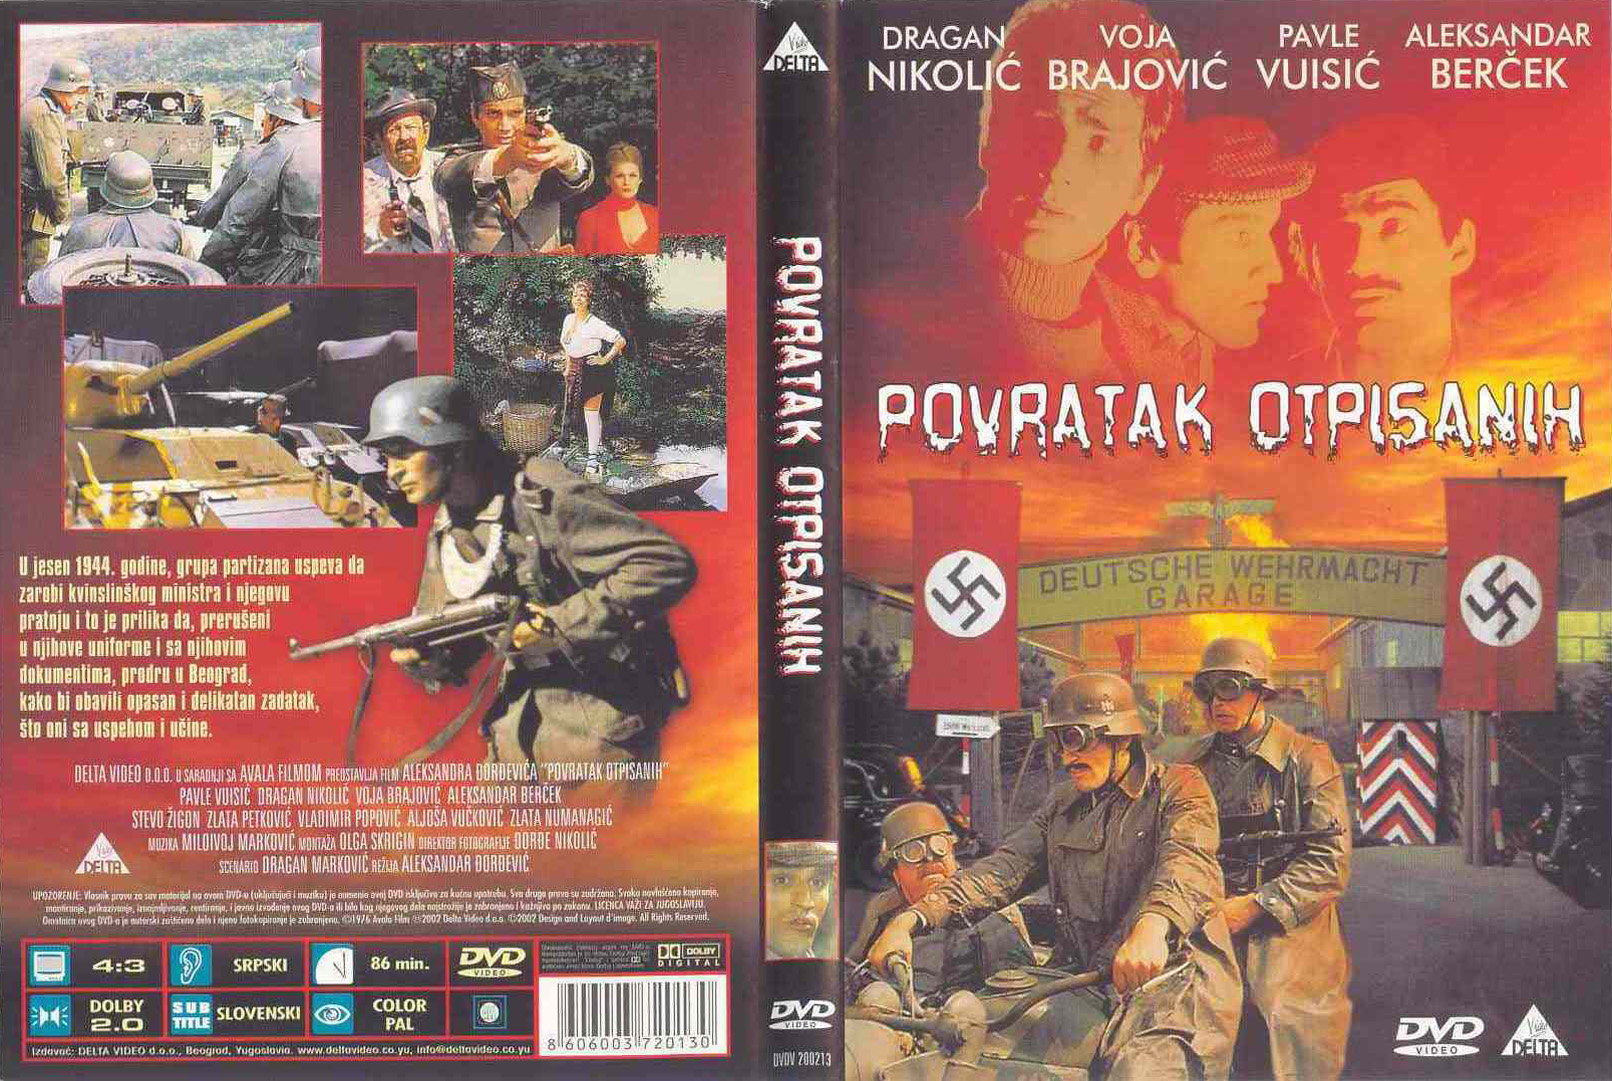 Click to view full size image -  DVD Cover - P - povratak_otpisanih_dvd - povratak_otpisanih_dvd.jpg